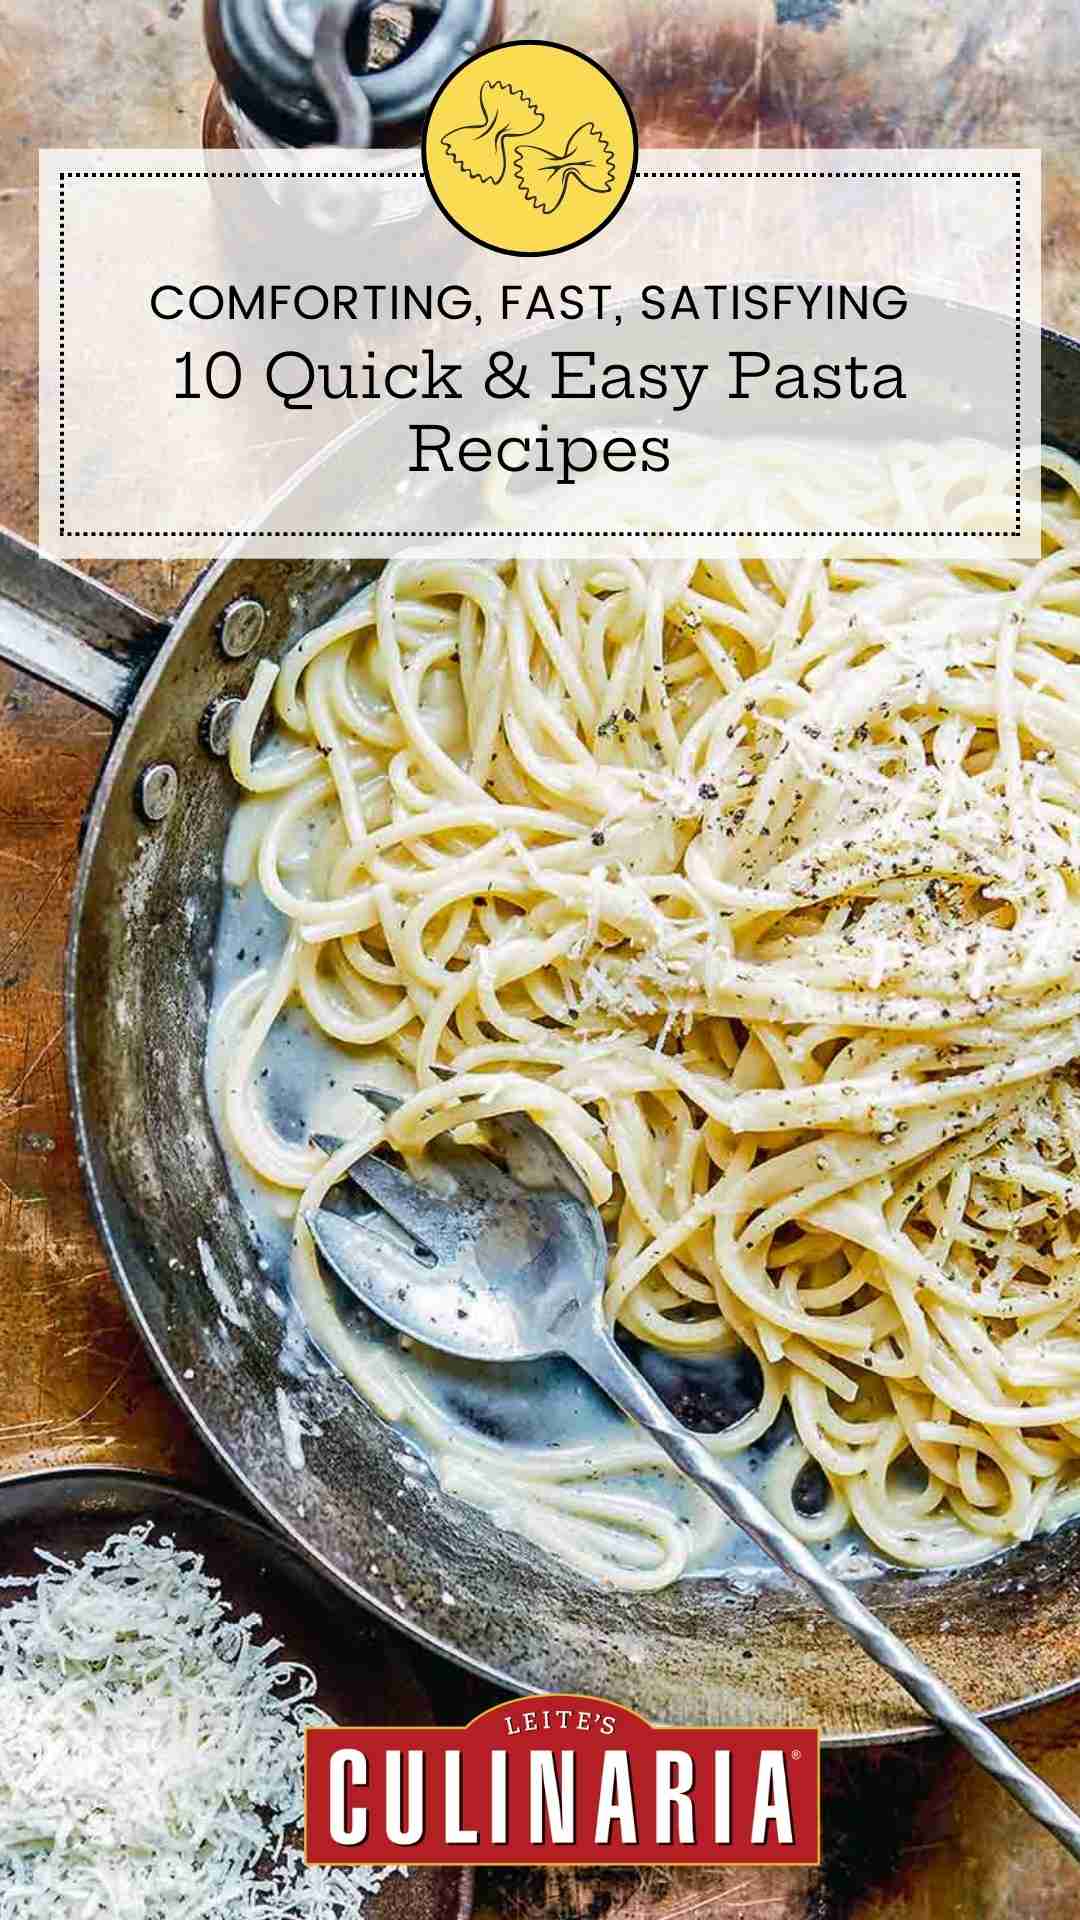 A skillet filled with cacio e pepe, with a bowl of shredded Parmesan cheese on the side.